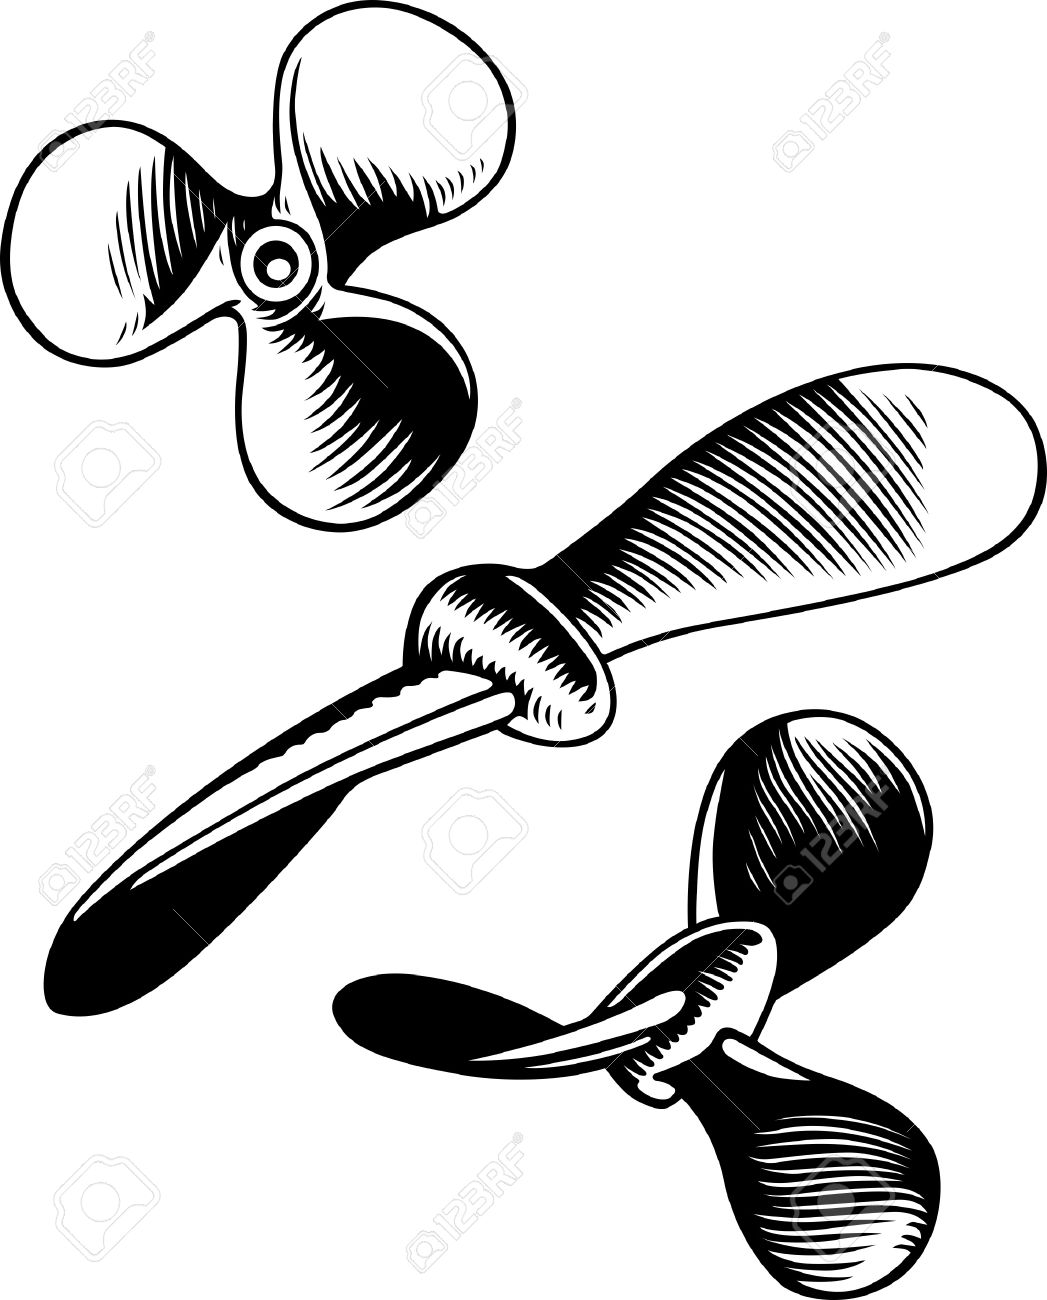 boat propeller clipart free - photo #46